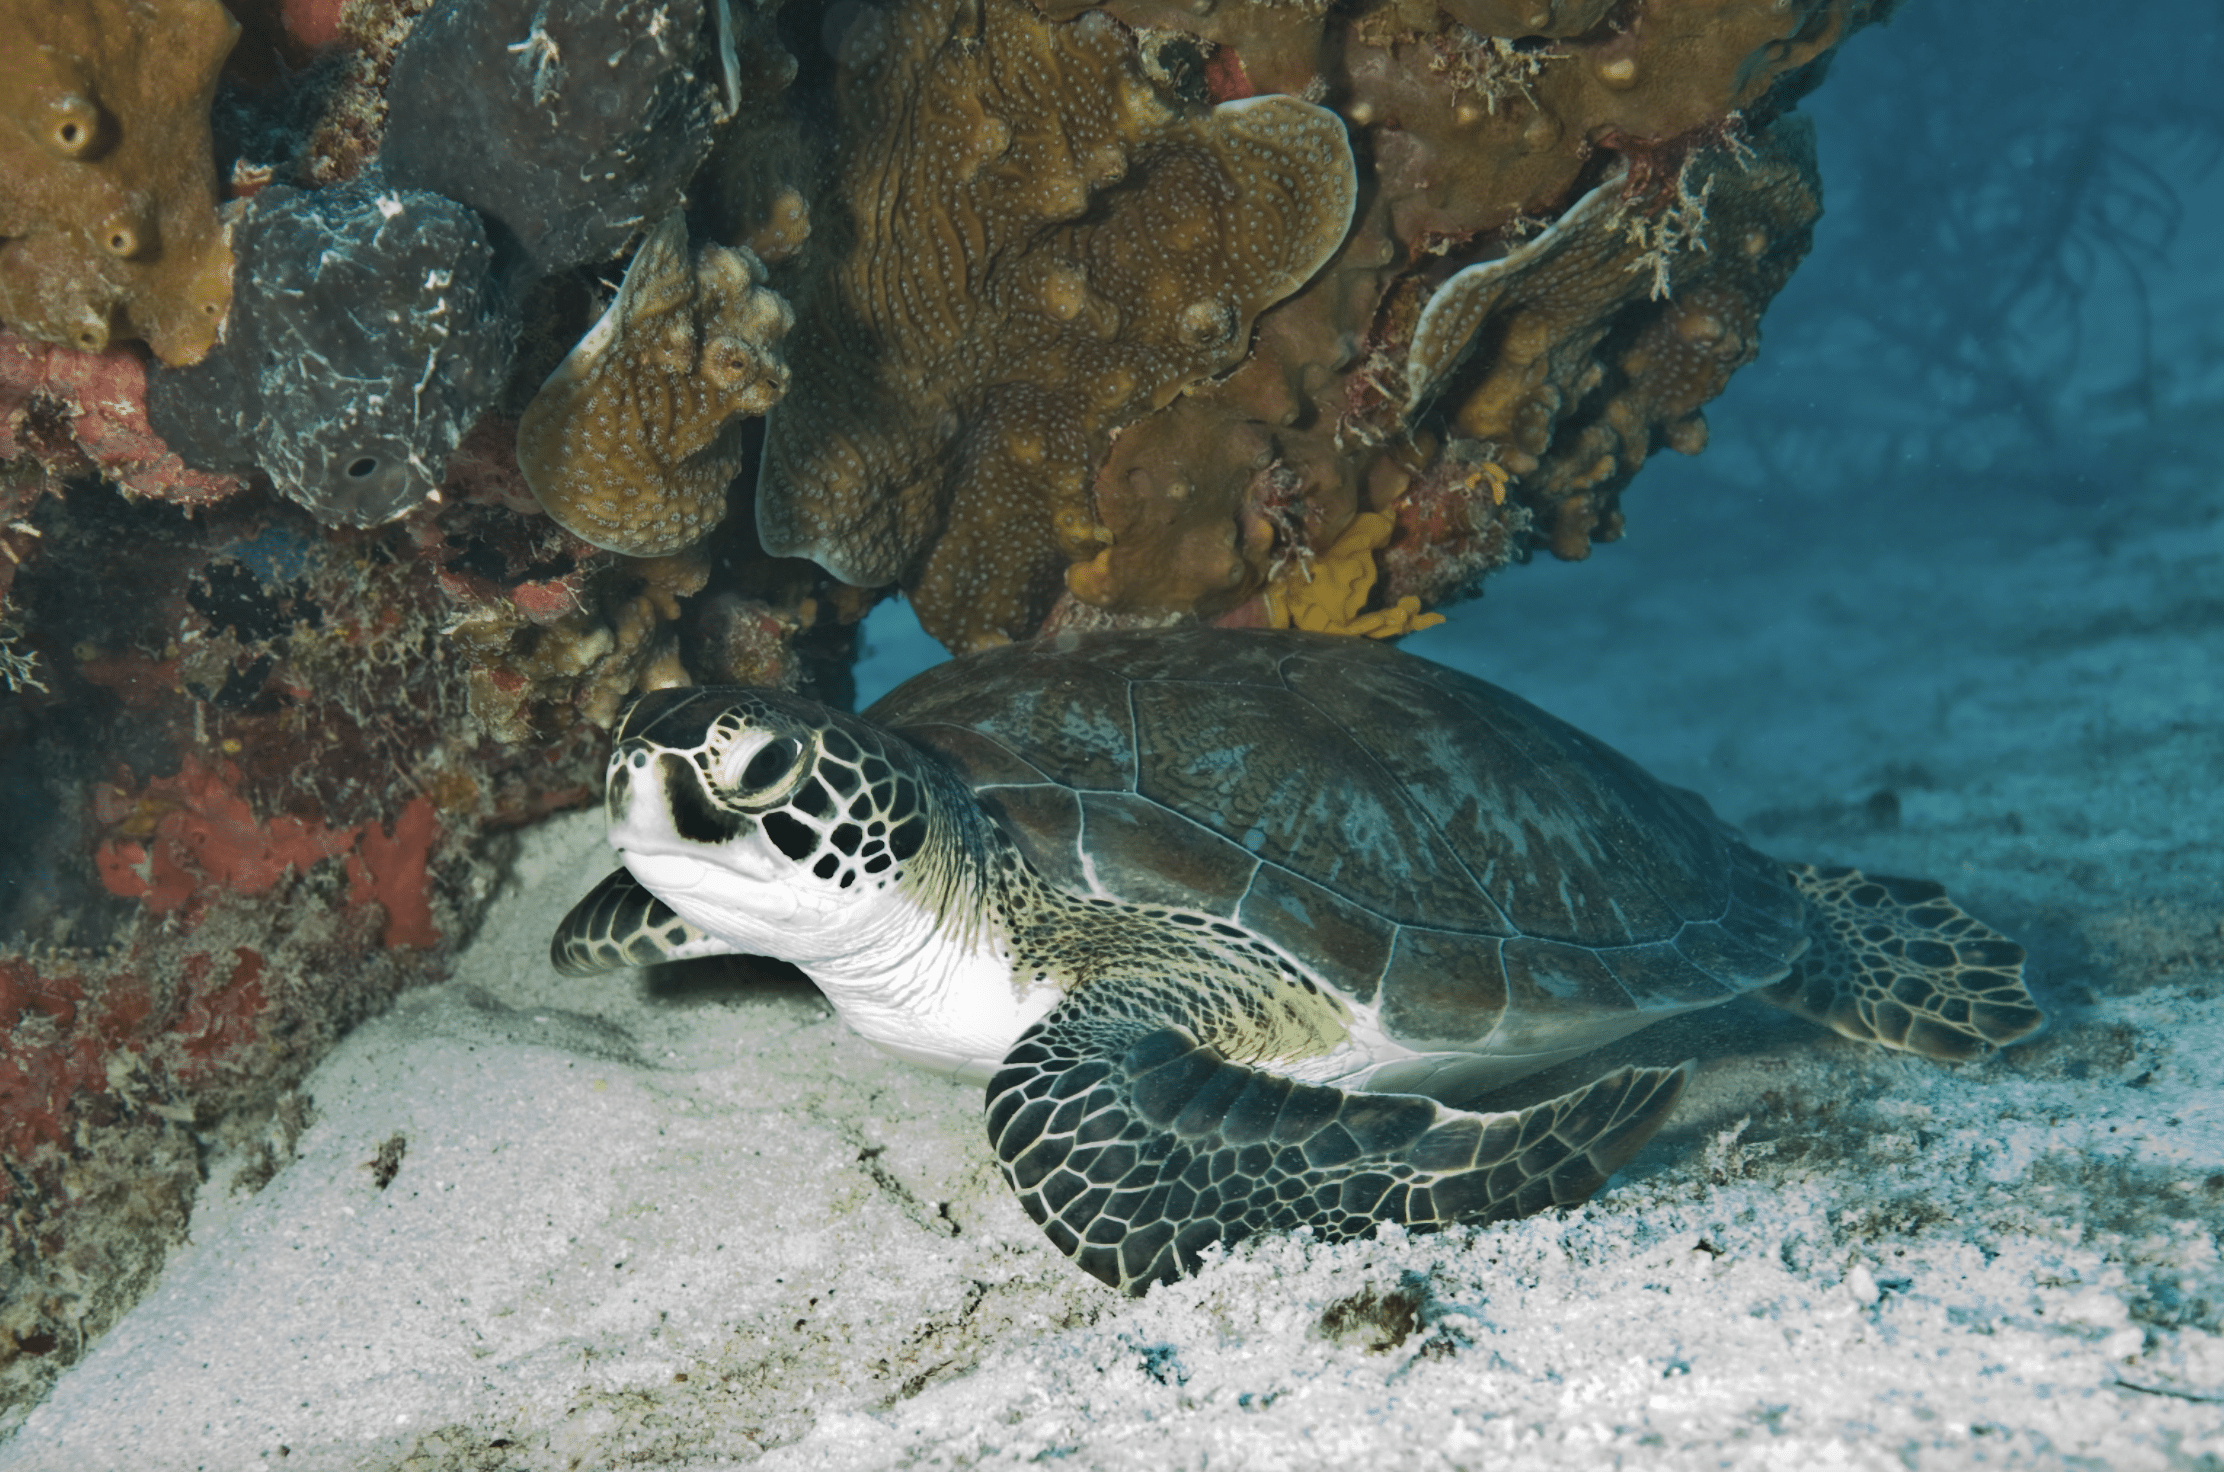 A Green Sea Turtle rests next to some coral in Biscayne Bay National Park.